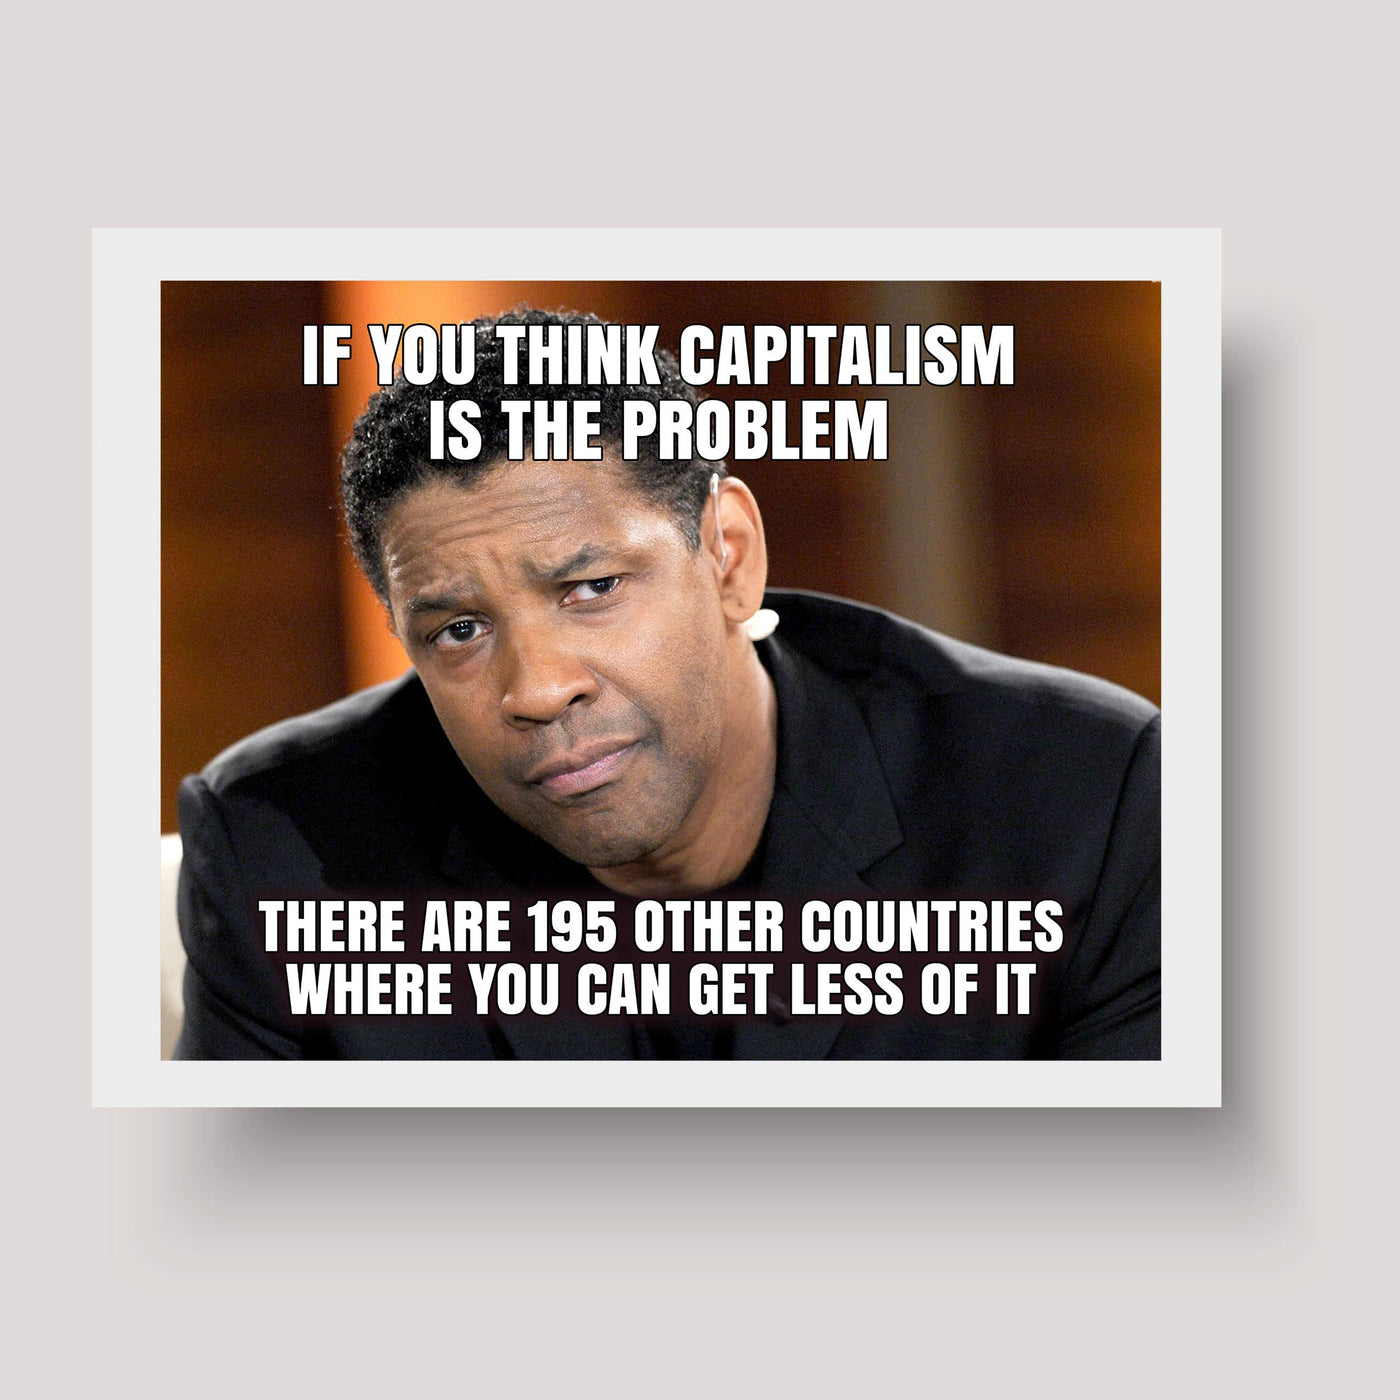 If Capitalism Is the Problem-194 Other Countries With Less of It-8 x 10" Political Quotes Wall Art Print-Ready to Frame. Motivational Home-Office-Studio-Cave Decor. Perfect for History Classroom!